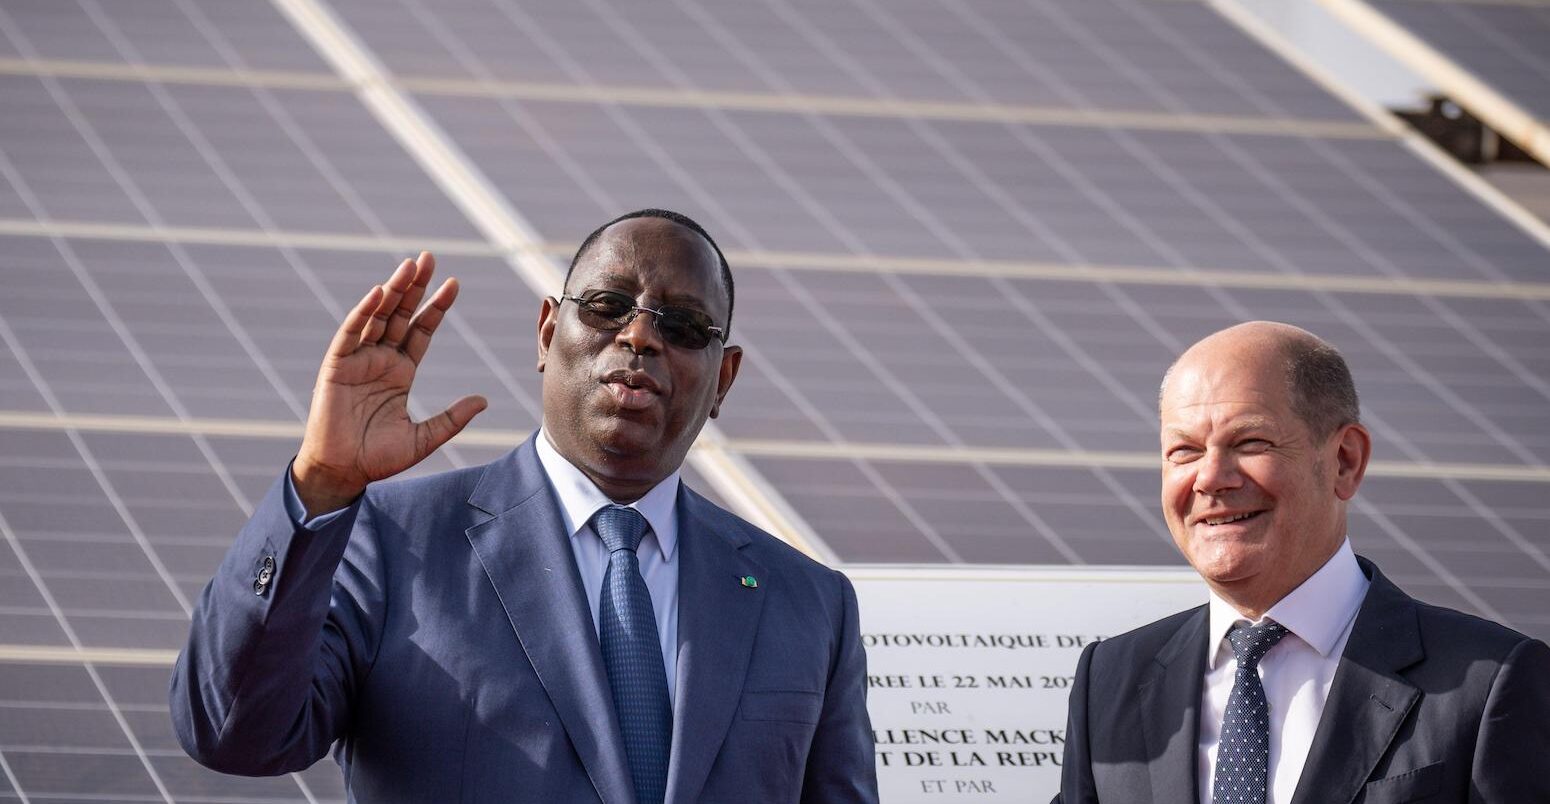 German Chancellor Olaf Scholz and Senegalese President Macky Sall at the opening of a photovoltaic plant in Diass on 22 May 2022.